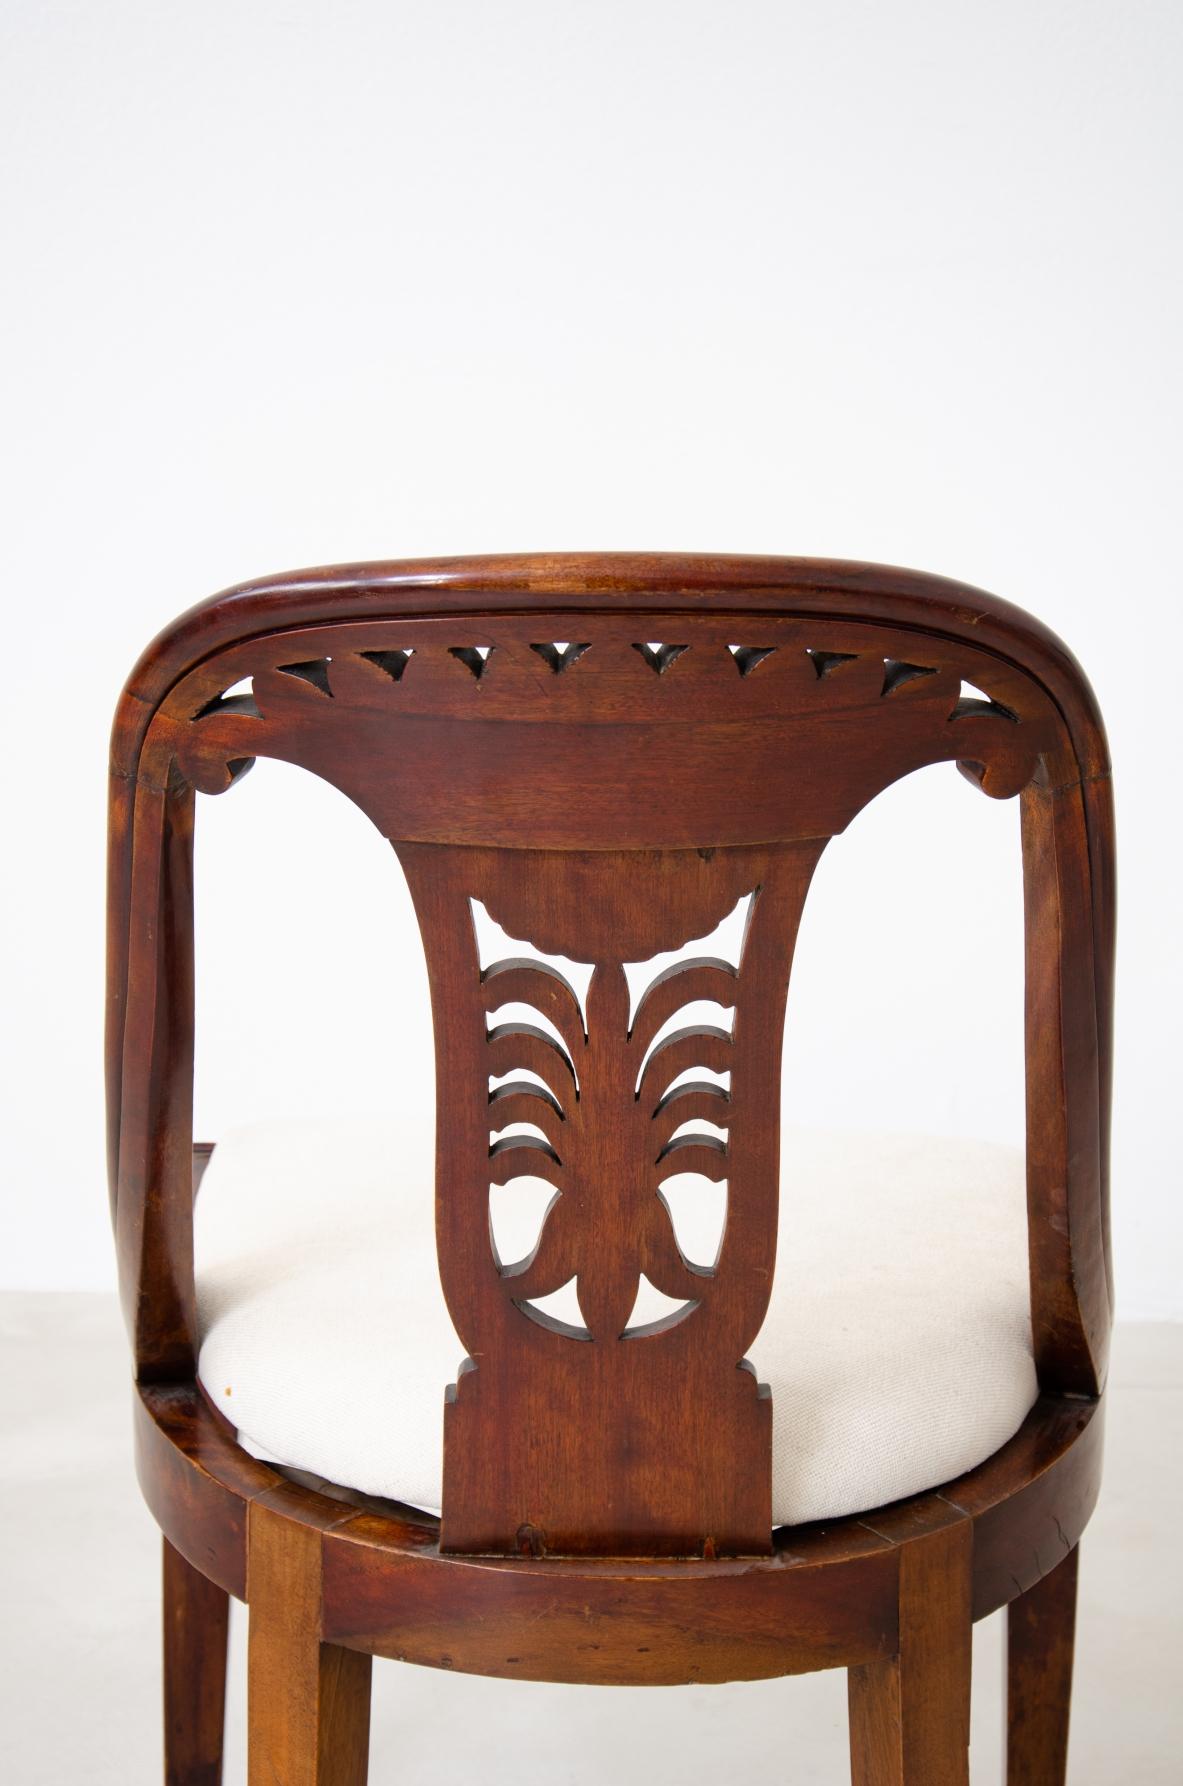 Set of 12 Antique Walnut Cockpit Chairs, Charles X Period For Sale 3